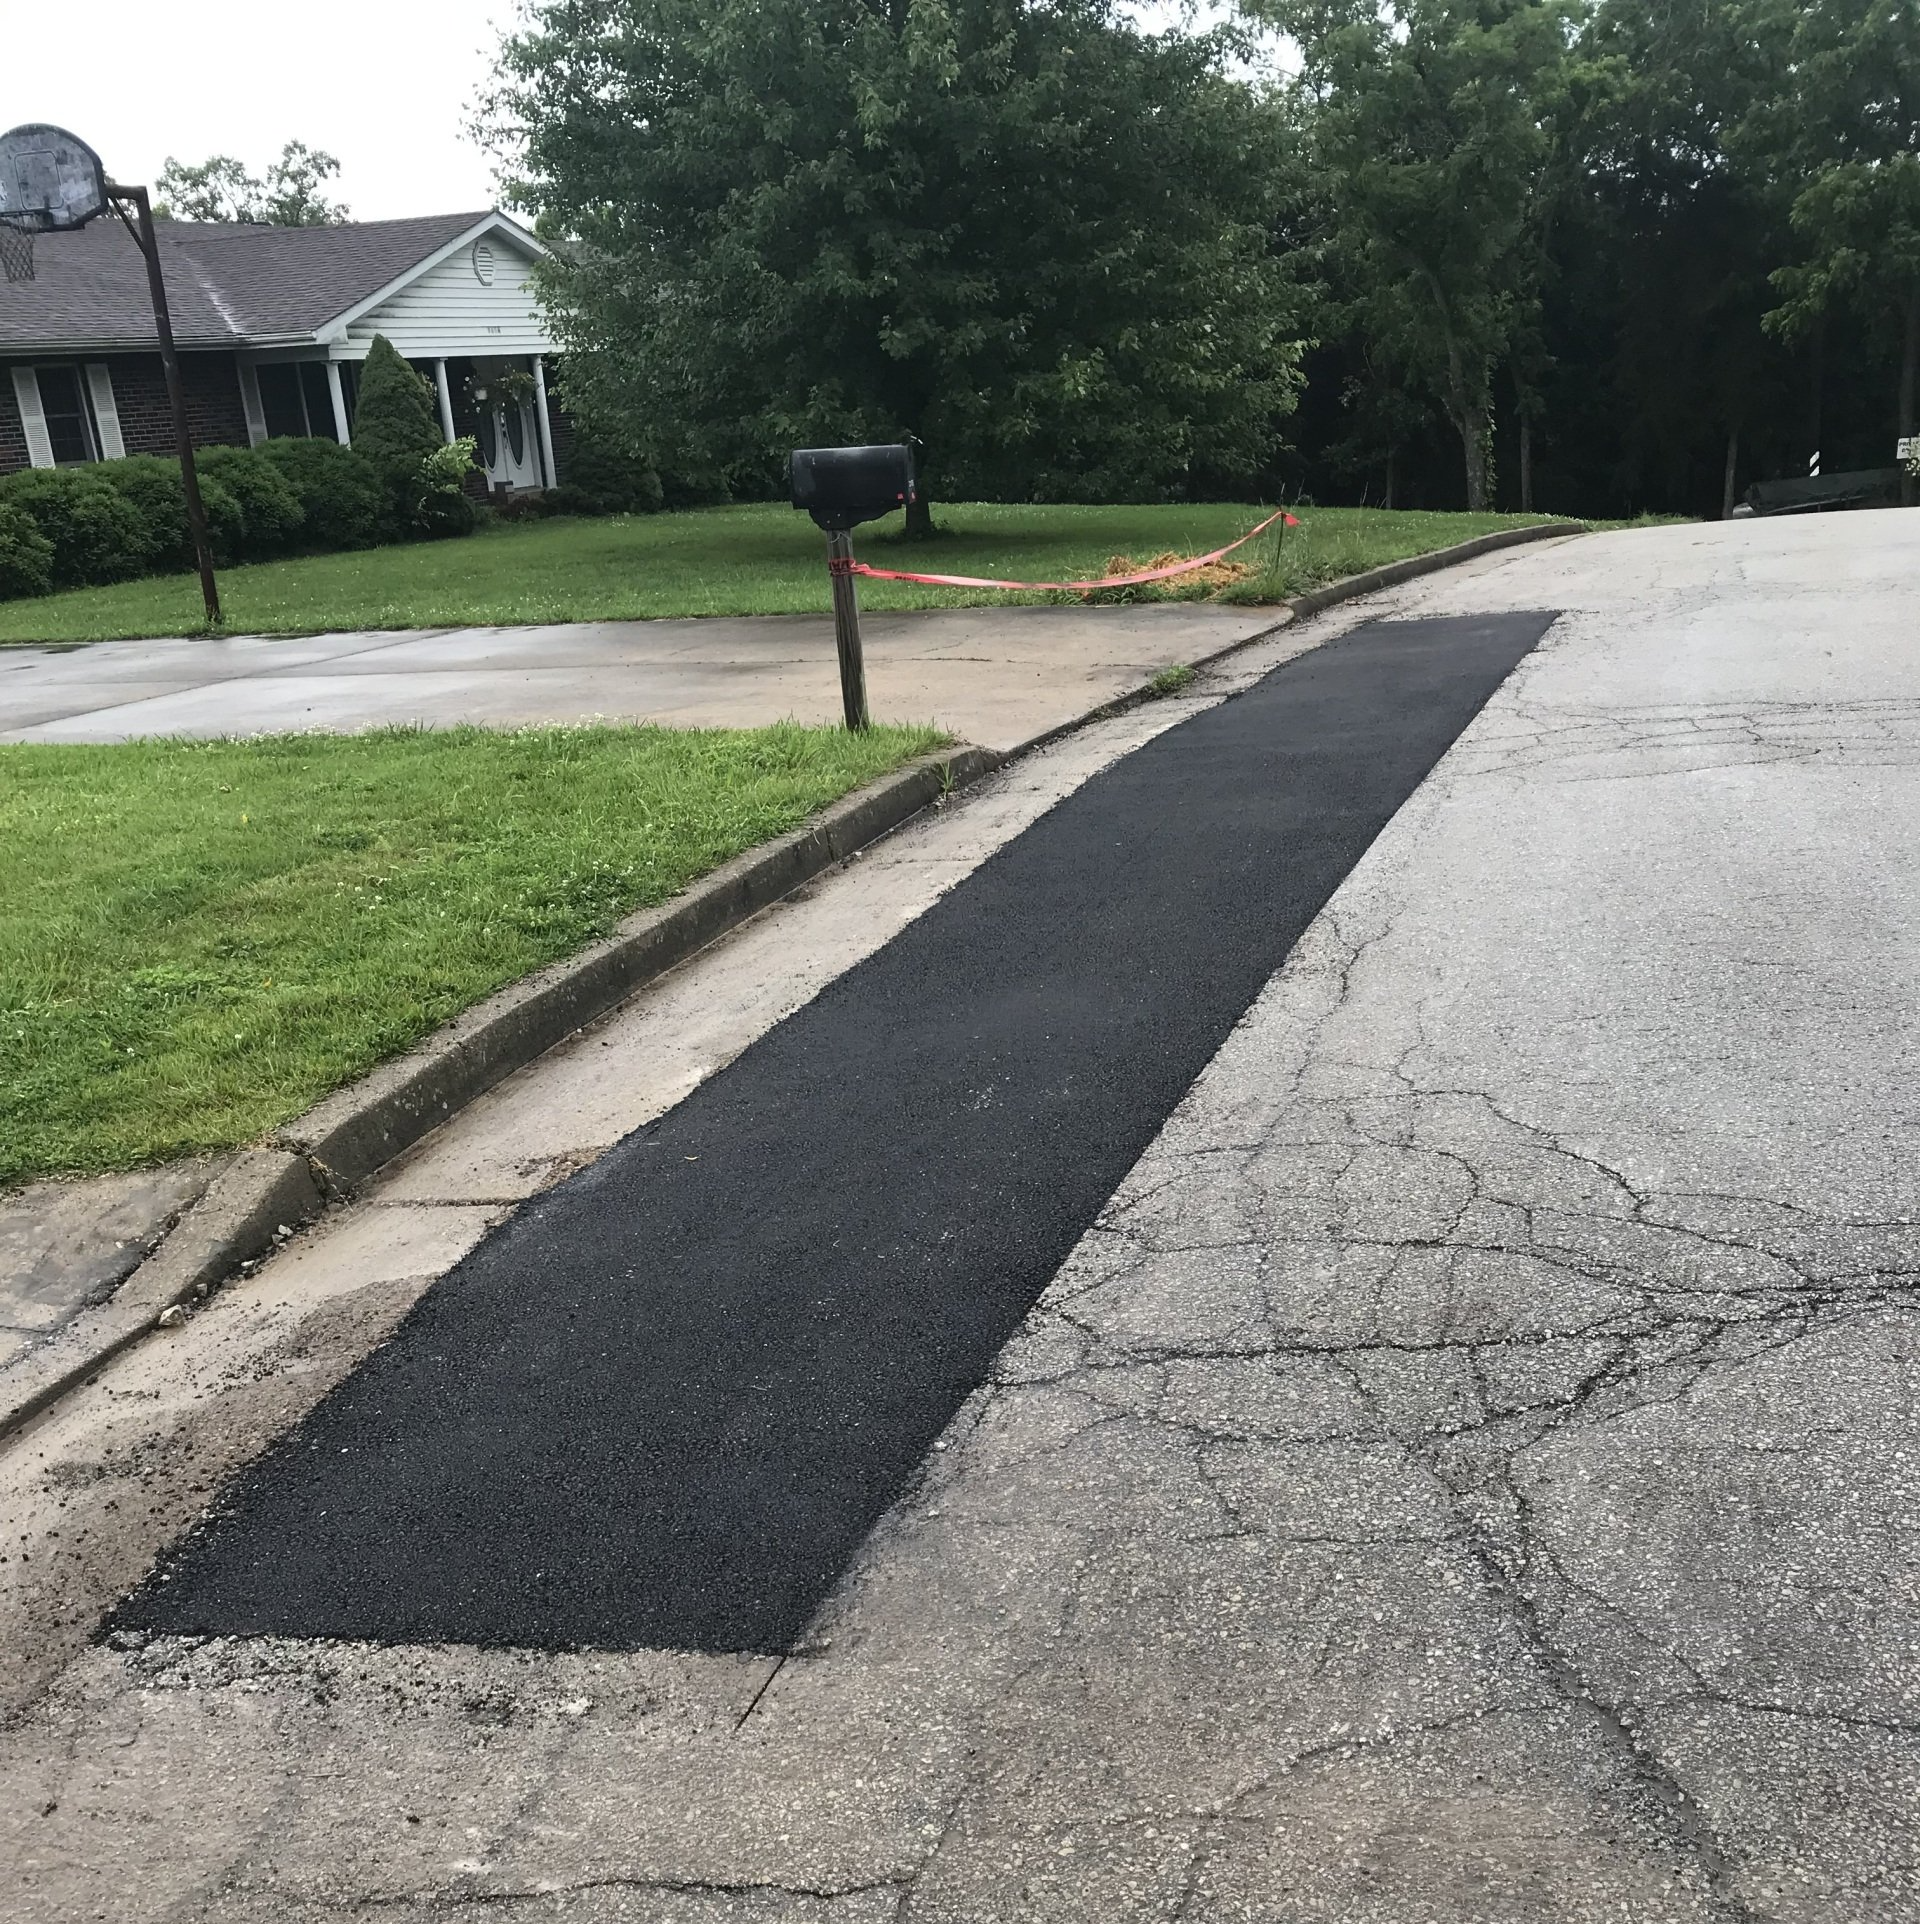 Get superior asphalt patching for cracking or crumbling commercial asphalt surfaces in mid-Missouri